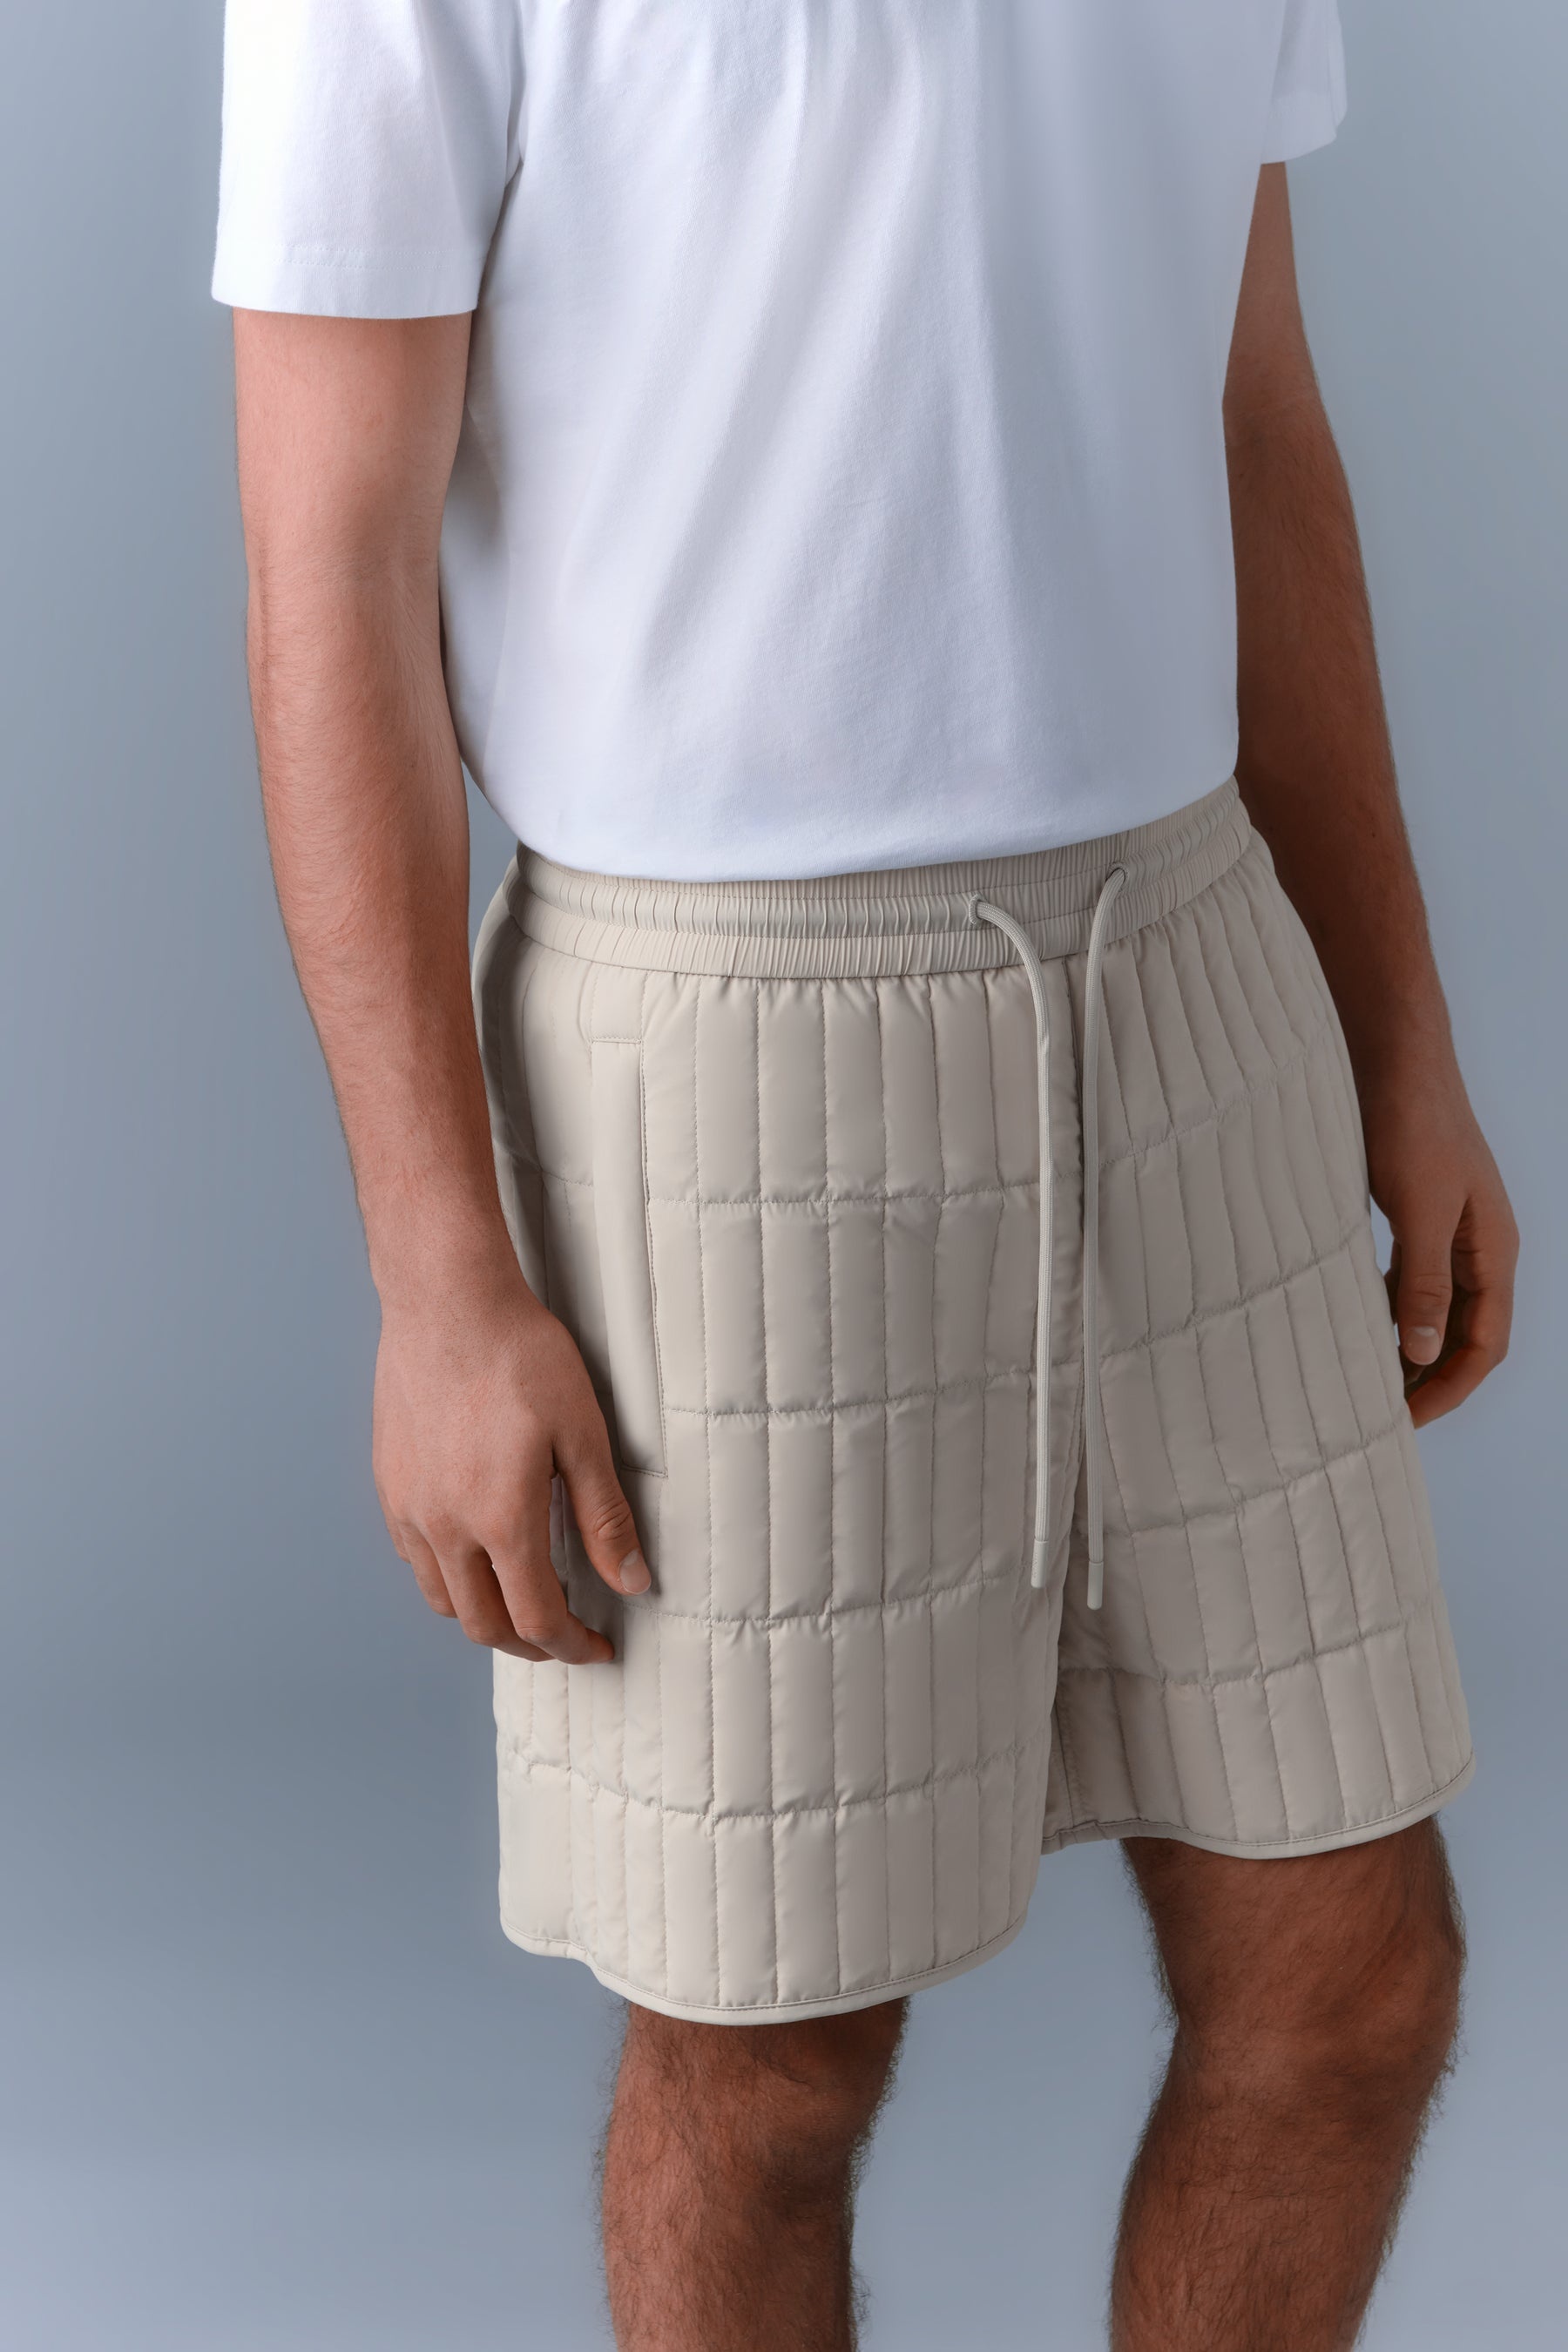 SEBASTIAN Vertical Quilted Shorts - 5